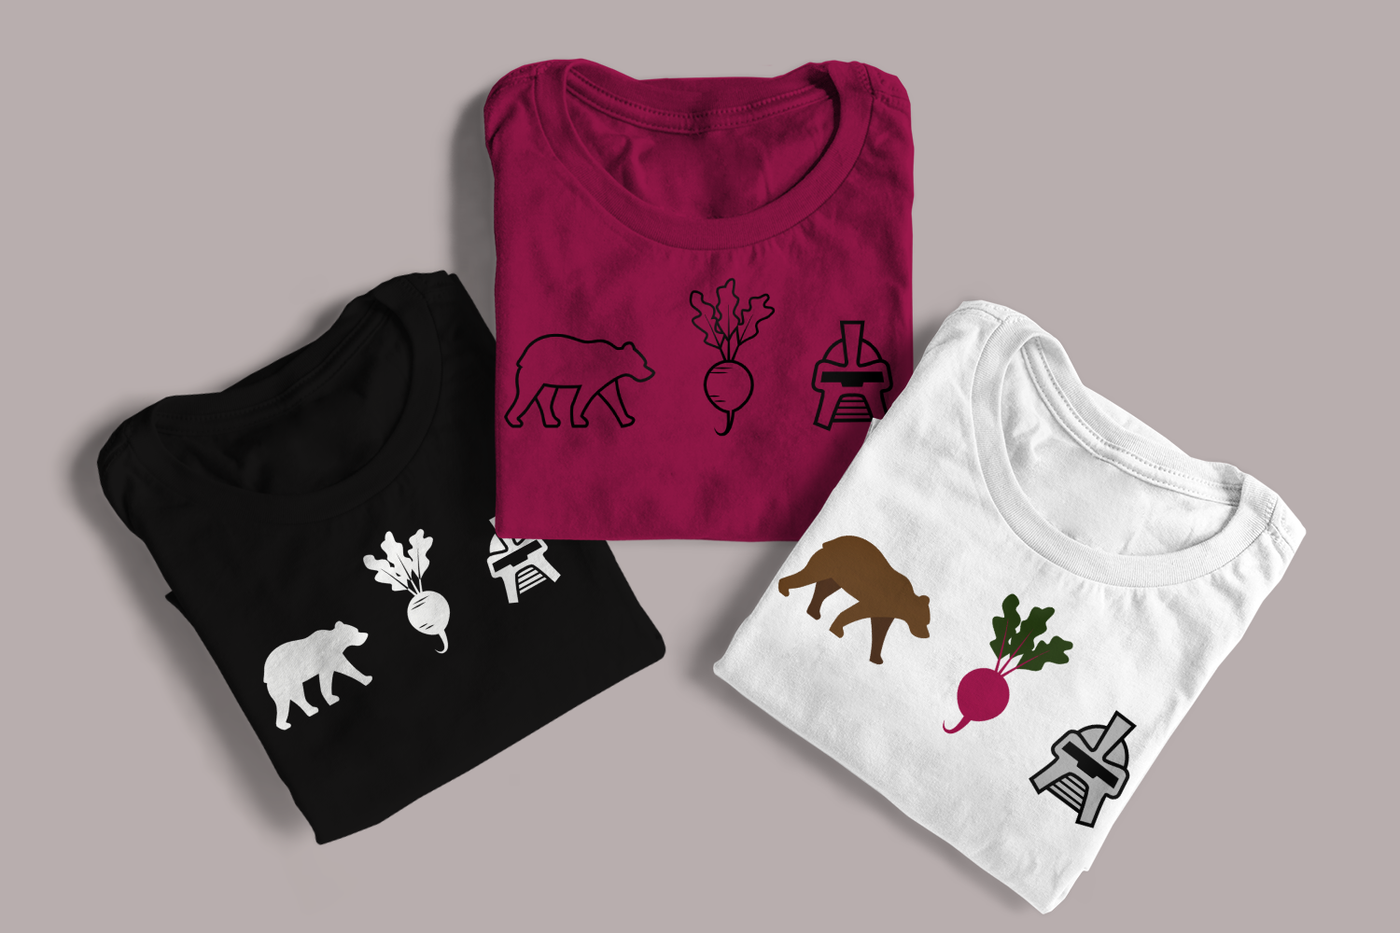 Three folded shirts on a grey background. Each shirt has the image of a bear, a beet, and a cylon helmet.